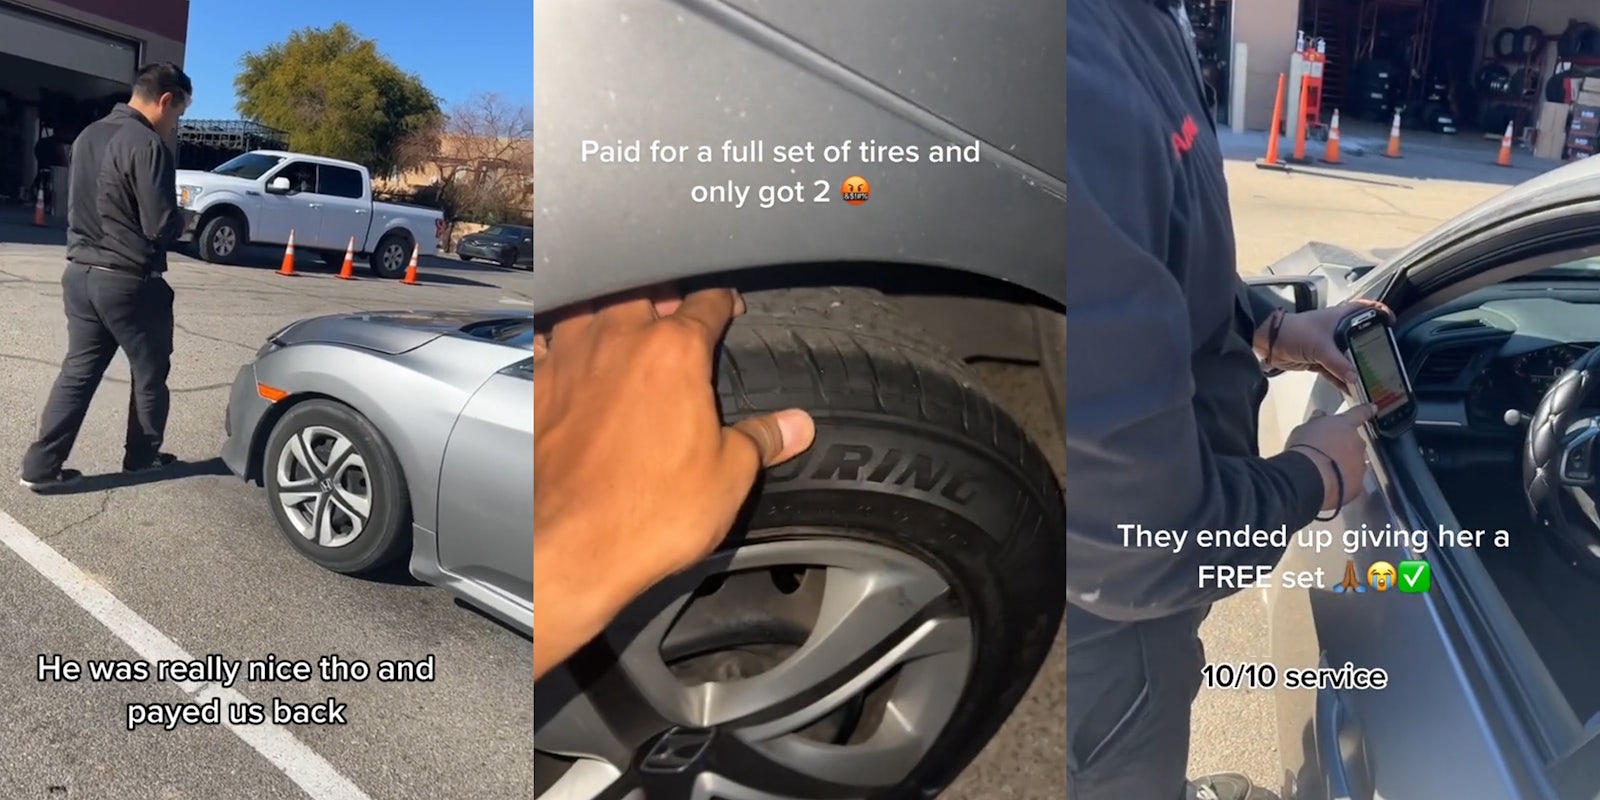 man walking next to car in parking lot caption 'He was really nice tho and payed us back' (l) man hand on tire caption 'Paid for a full set of tires and only got 2' (c) man tapping on screen in hand in car window caption 'They ended up giving her a FREE set 10/10 service' (r)